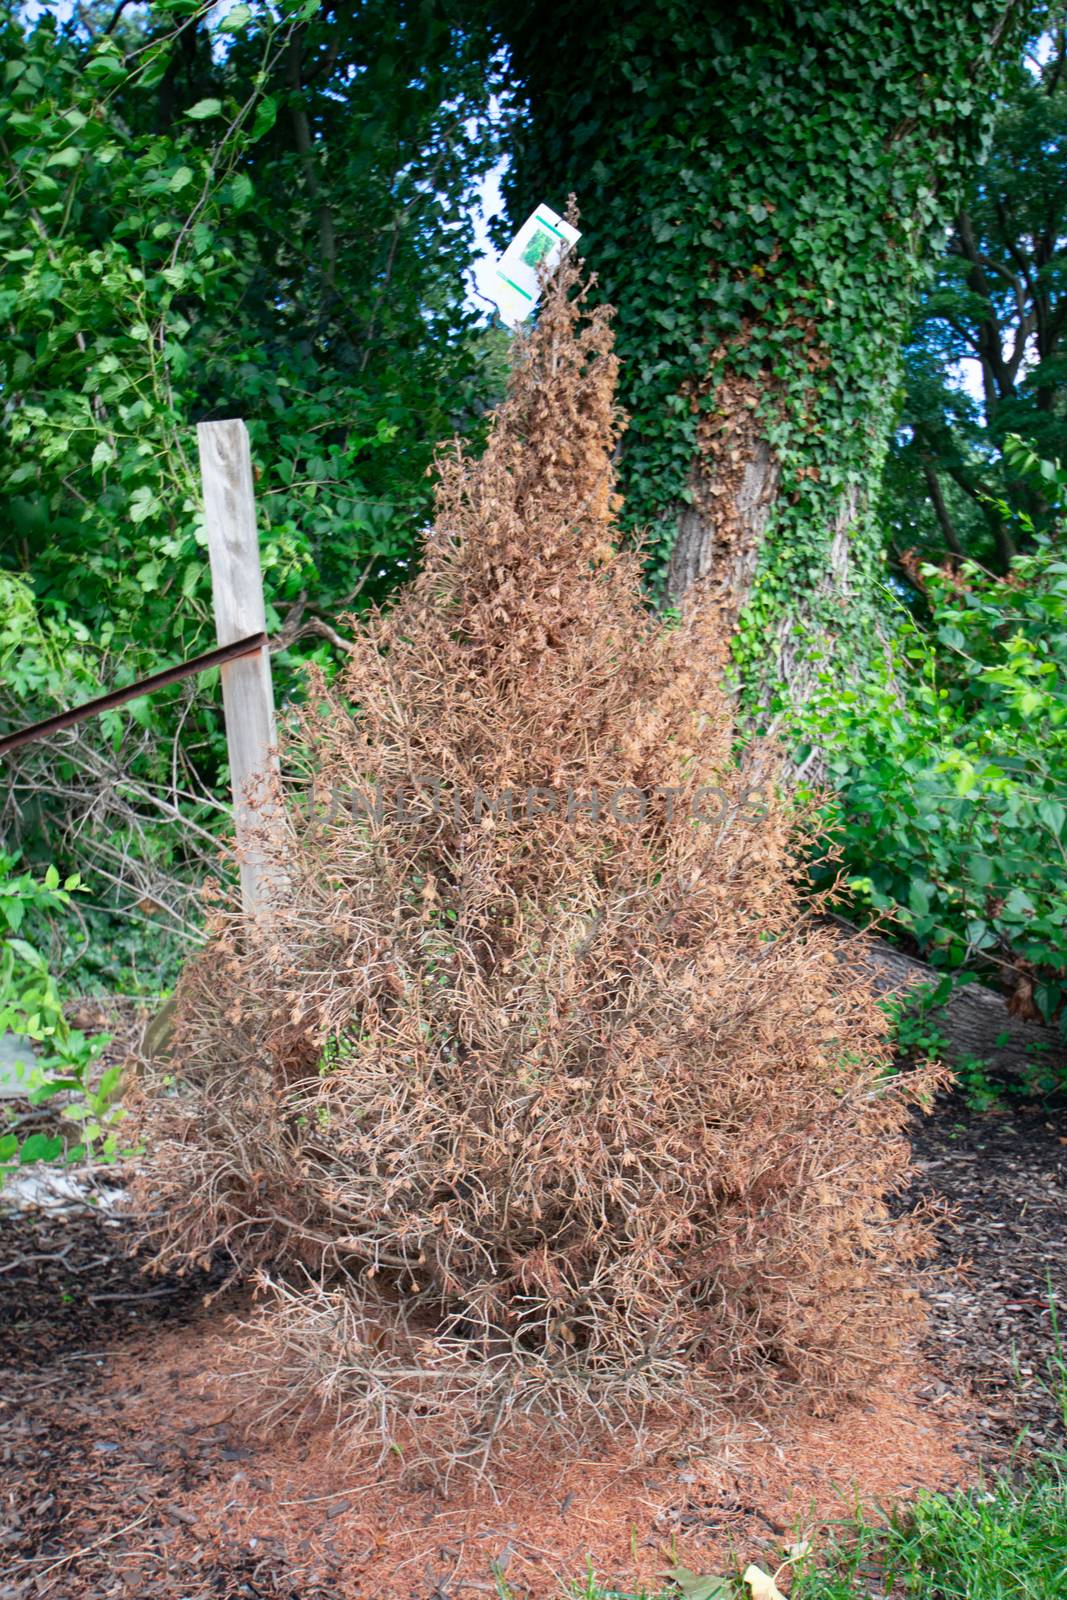 A Dead Tree Covered in Dry Brown Needles